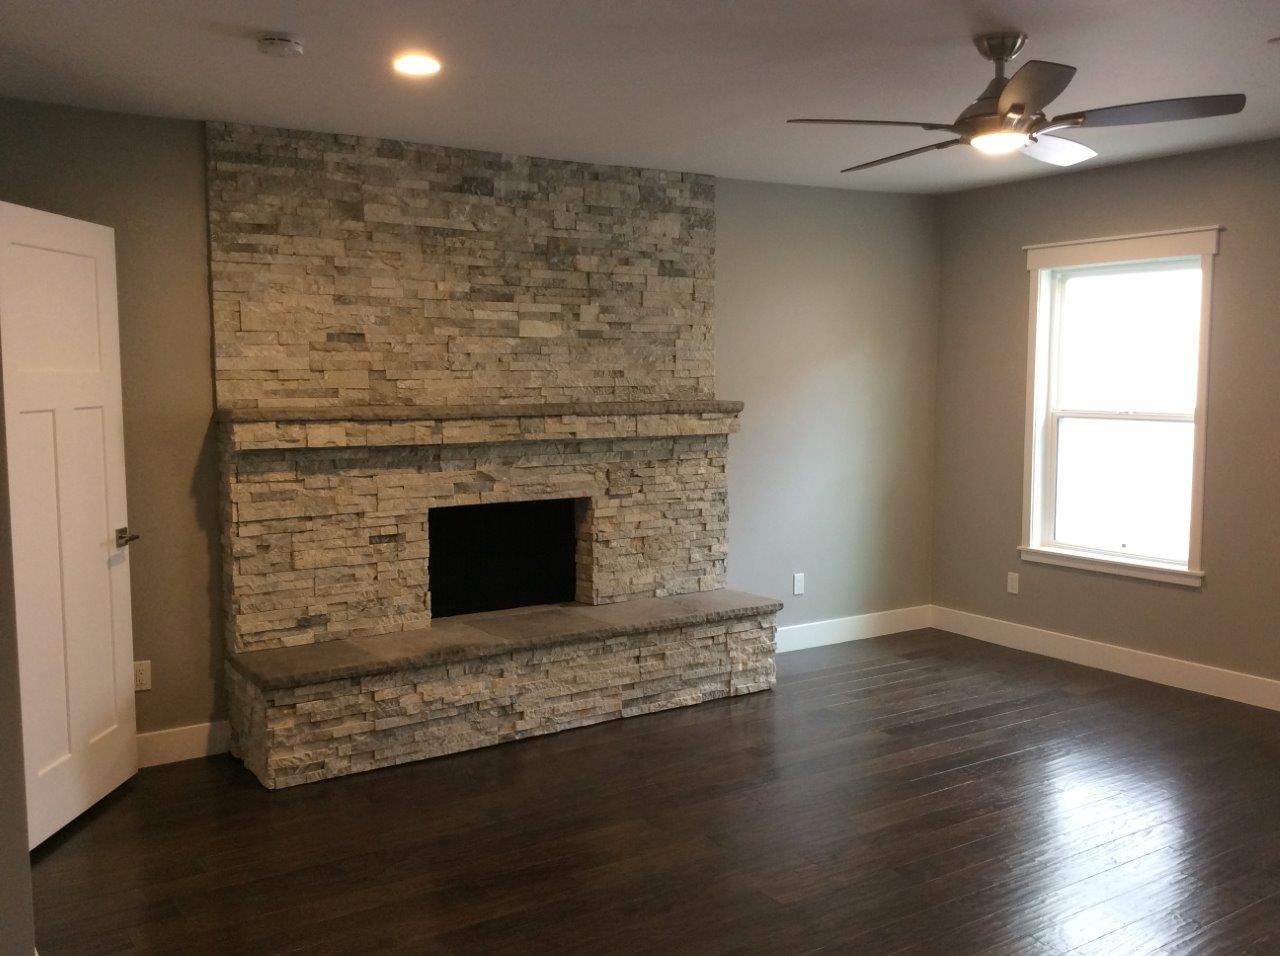 Residential painted room with fan and fireplace included